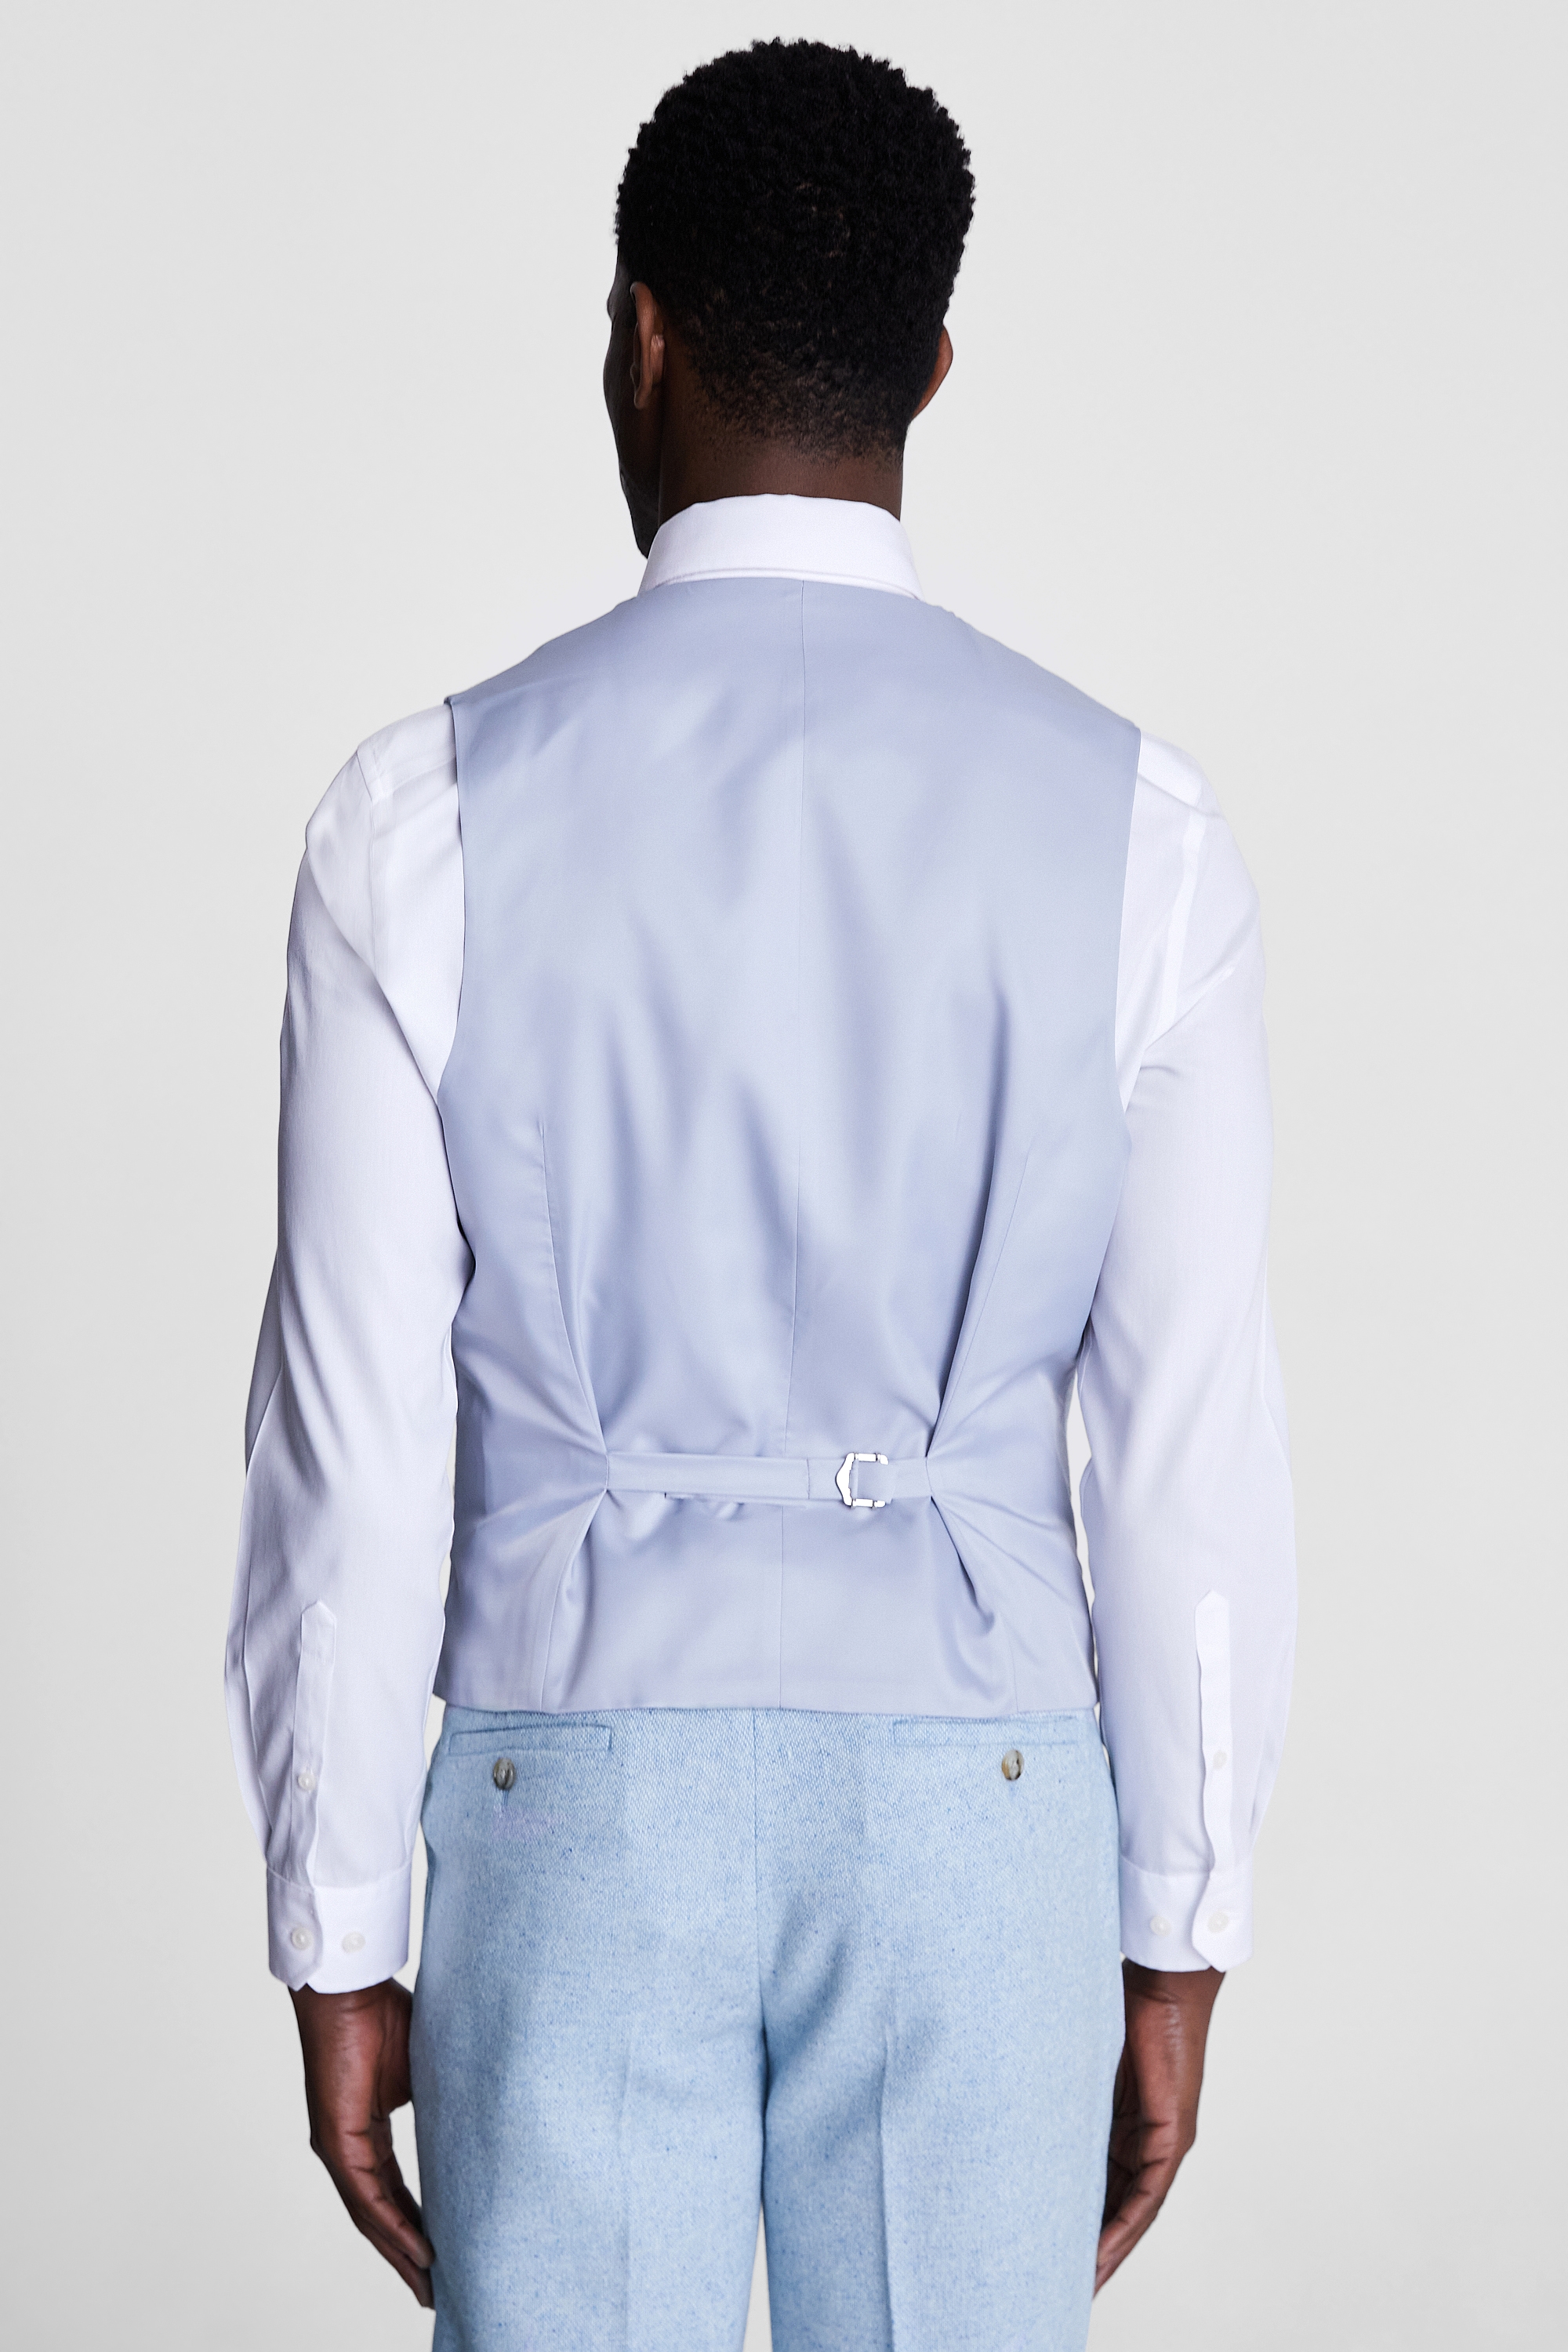 Slim Fit Light Blue Donegal Waistcoat | Buy Online at Moss